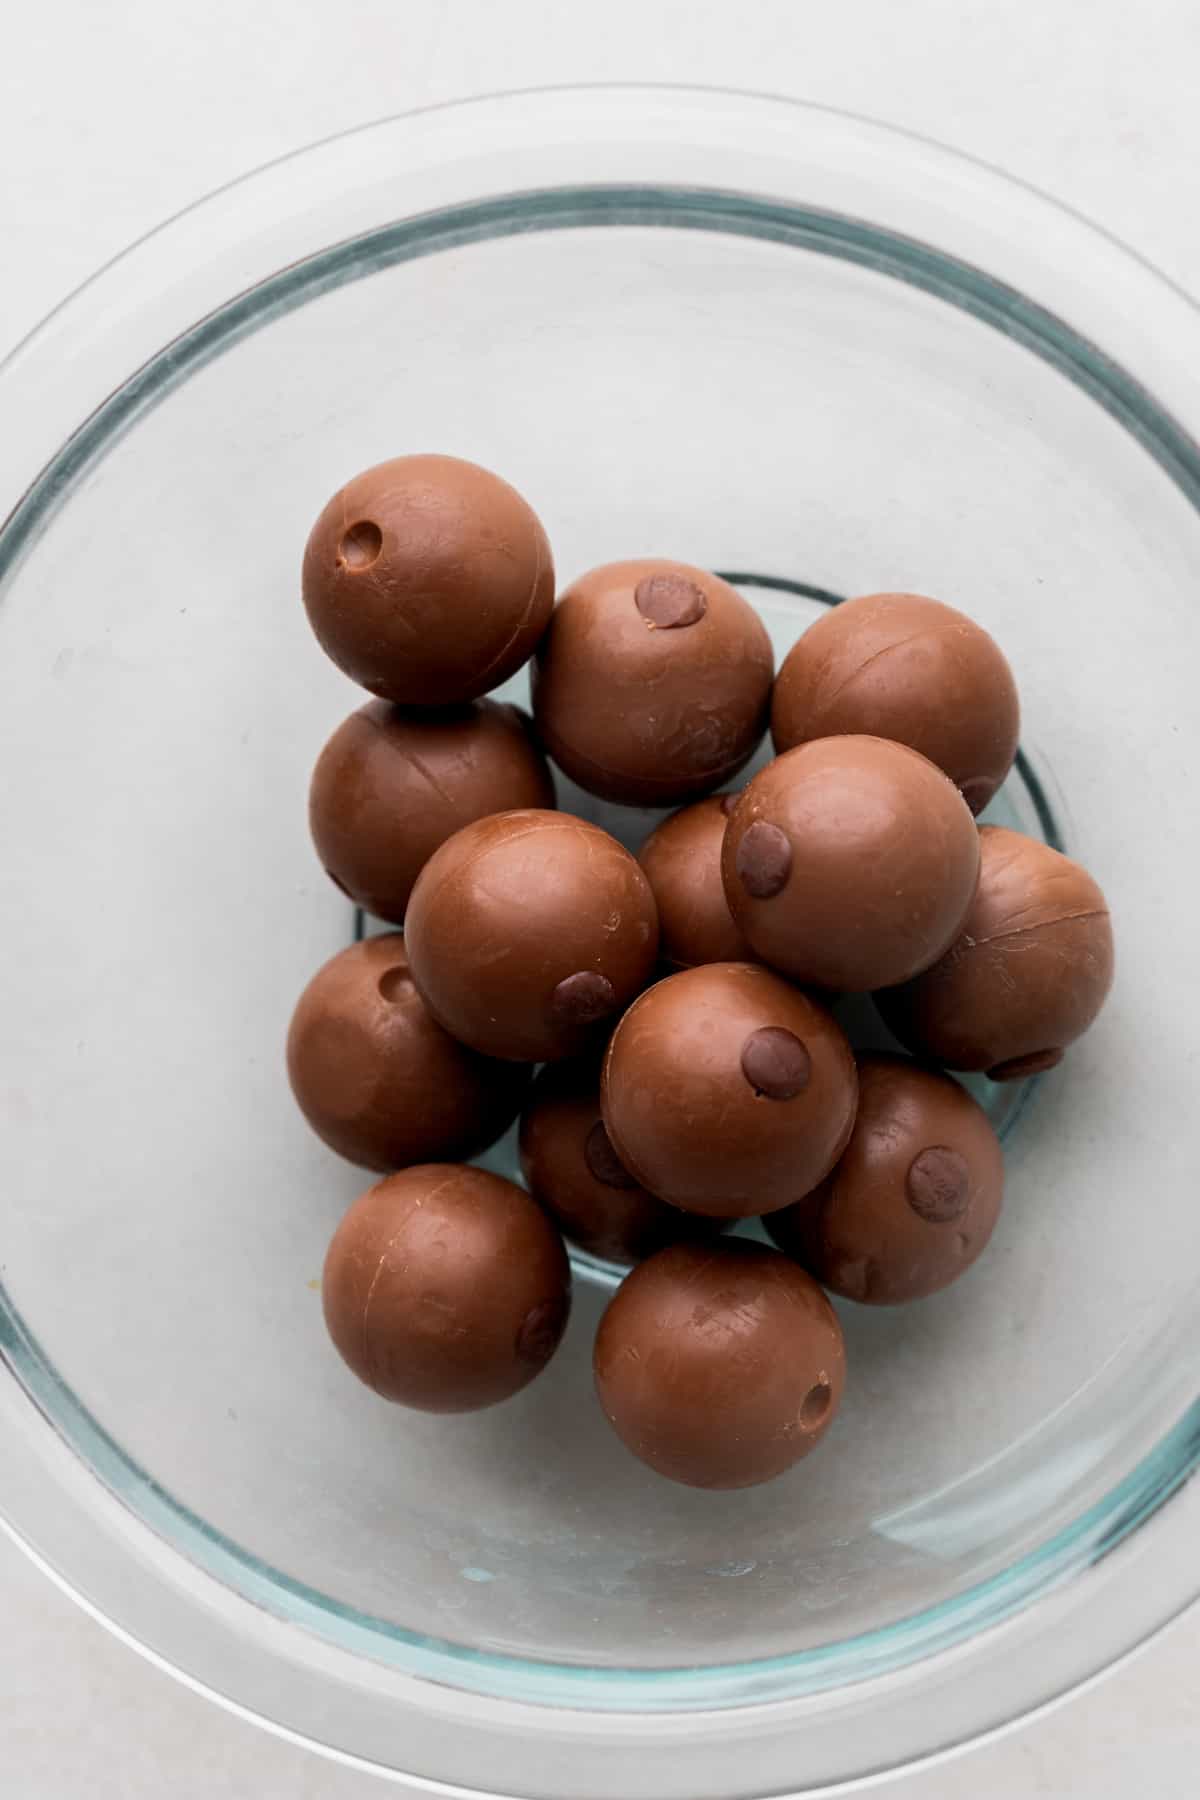 Lindt truffles in a glass bowl.